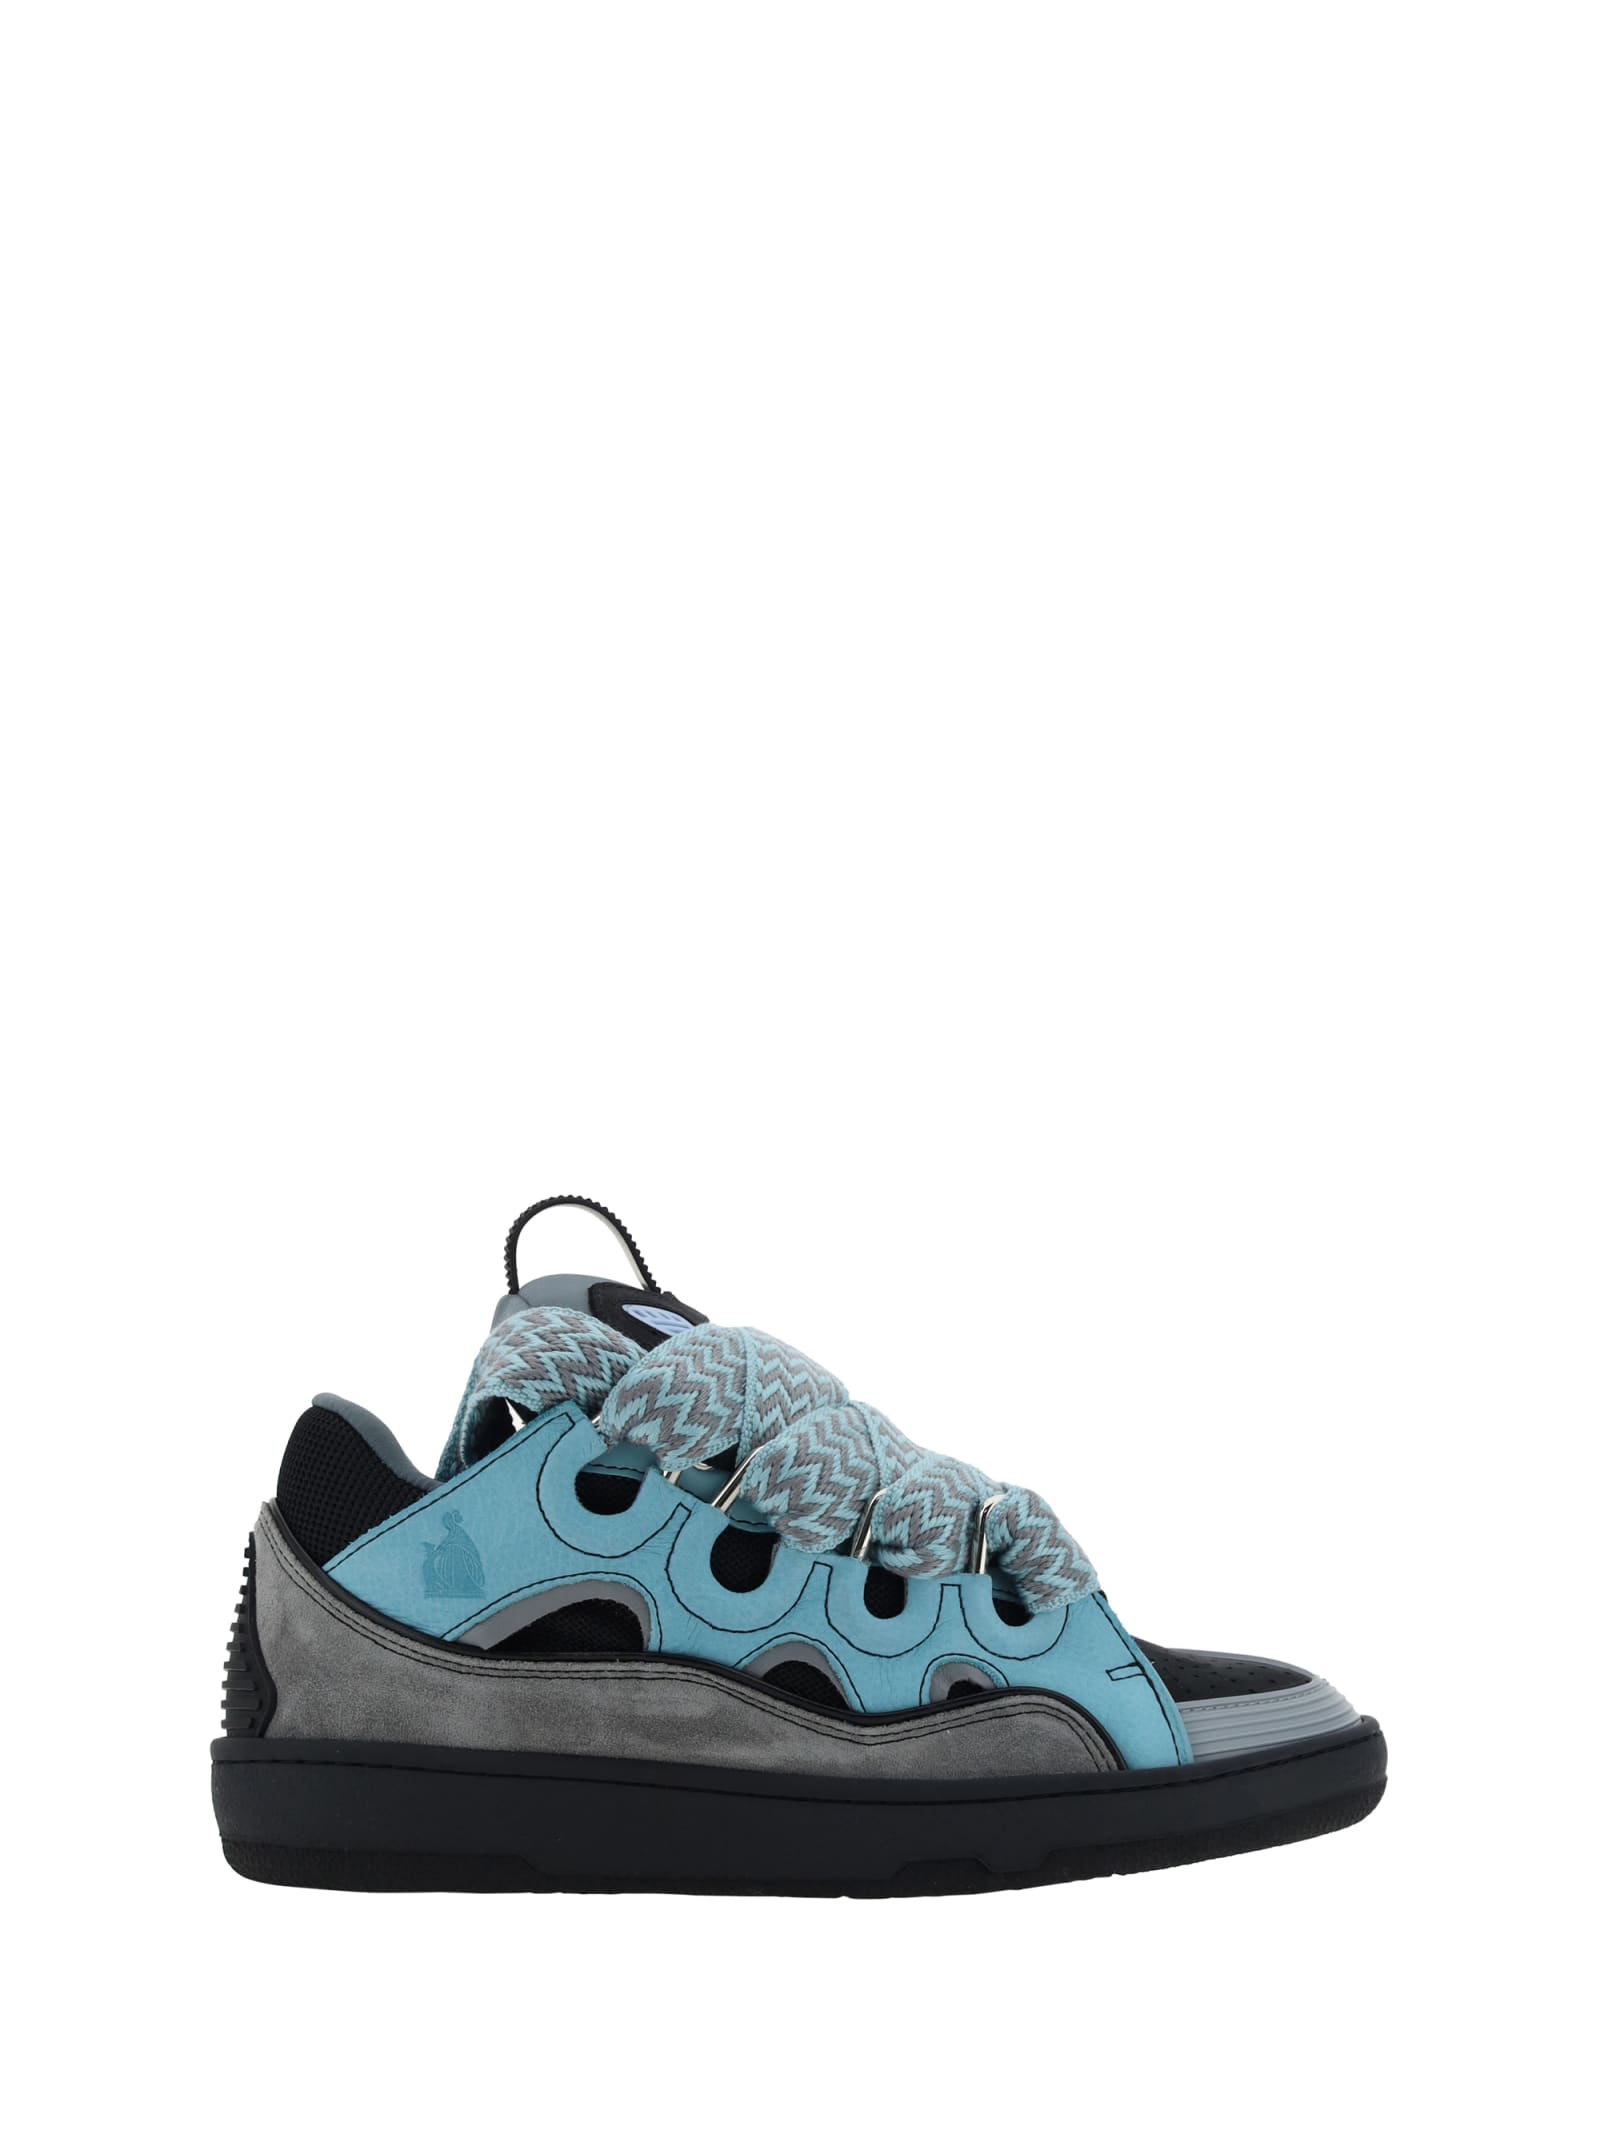 LANVIN CURB trainers